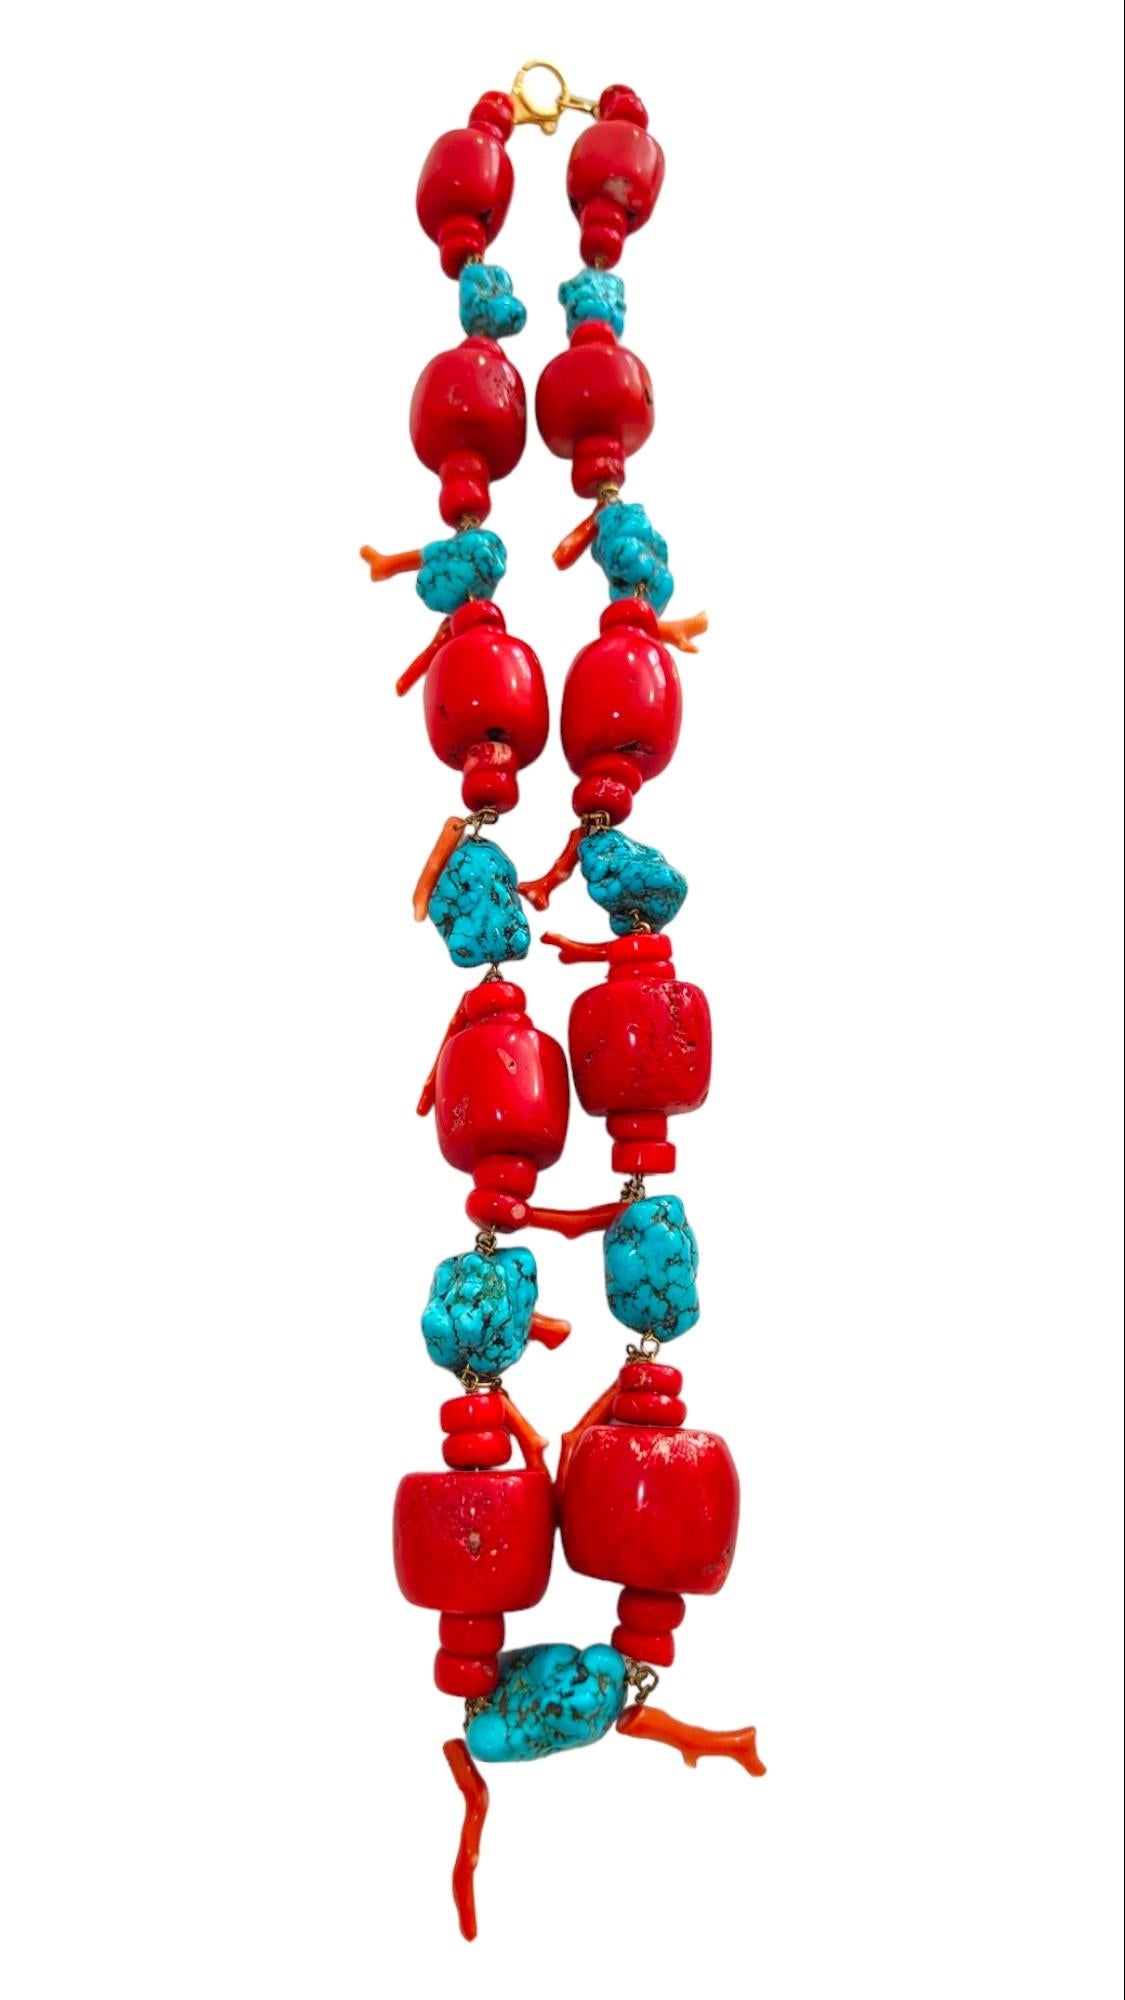 Huge Turquoise And Red Coral Necklace
Huge Turquoise and Red Coral Necklace.These huge polished chunks of turquoise are accented with huge highly polished red coral beads to complete this fascinating 90cm long necklace. The largest turquoise